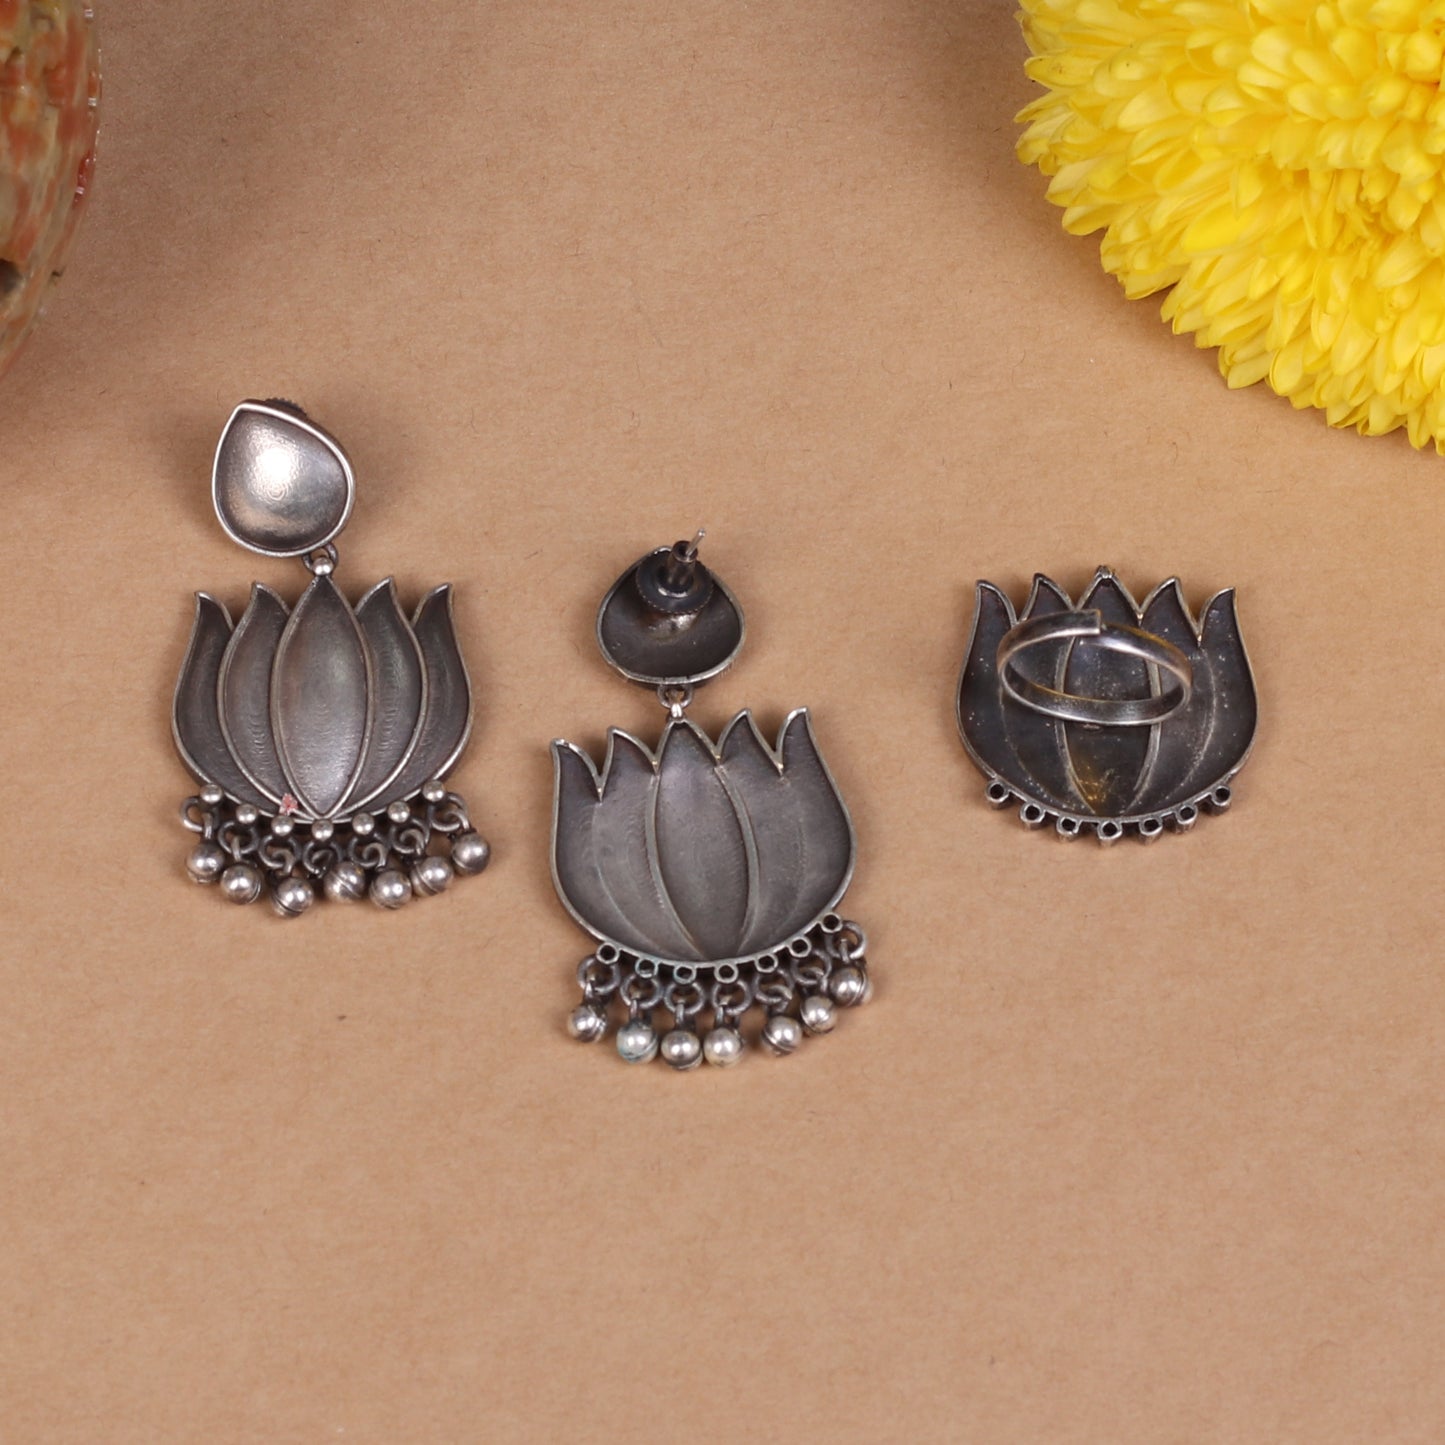 The Silver Lotus Ring and Earring Set